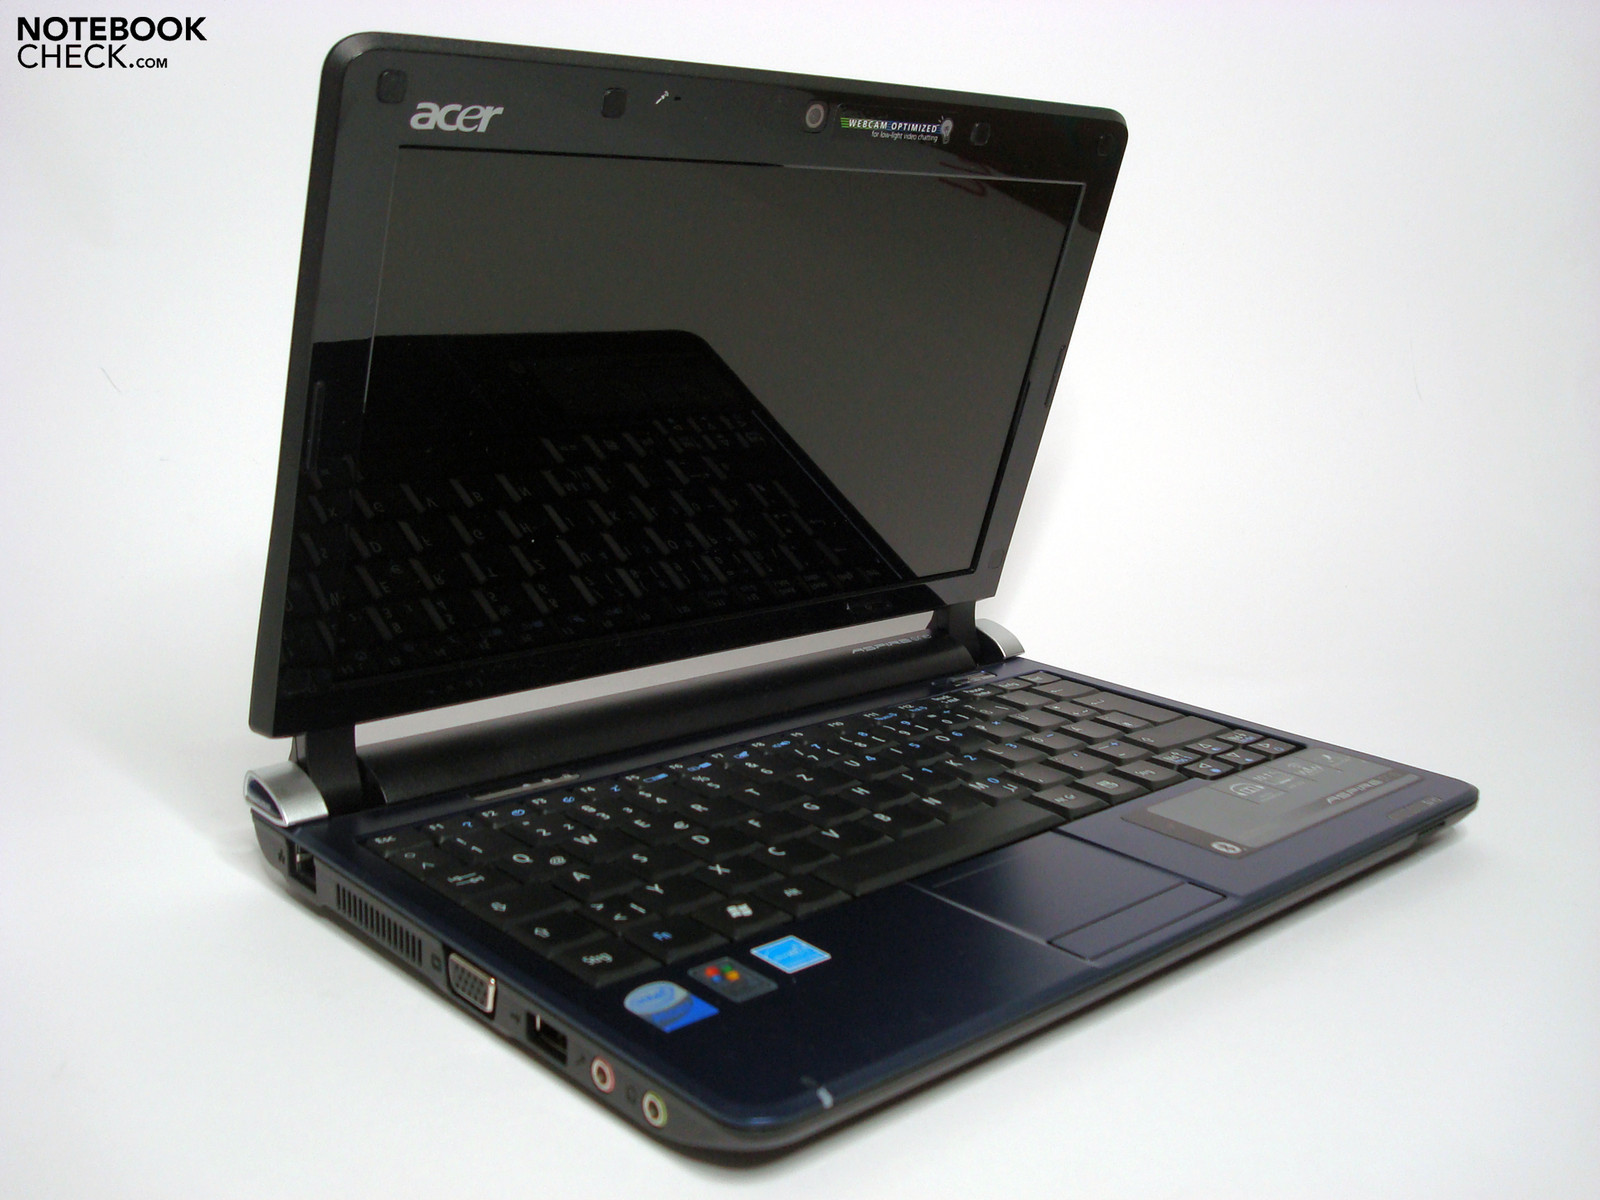 Acer Aspire One Windows Xp Home Edition Ulcpc Download Google